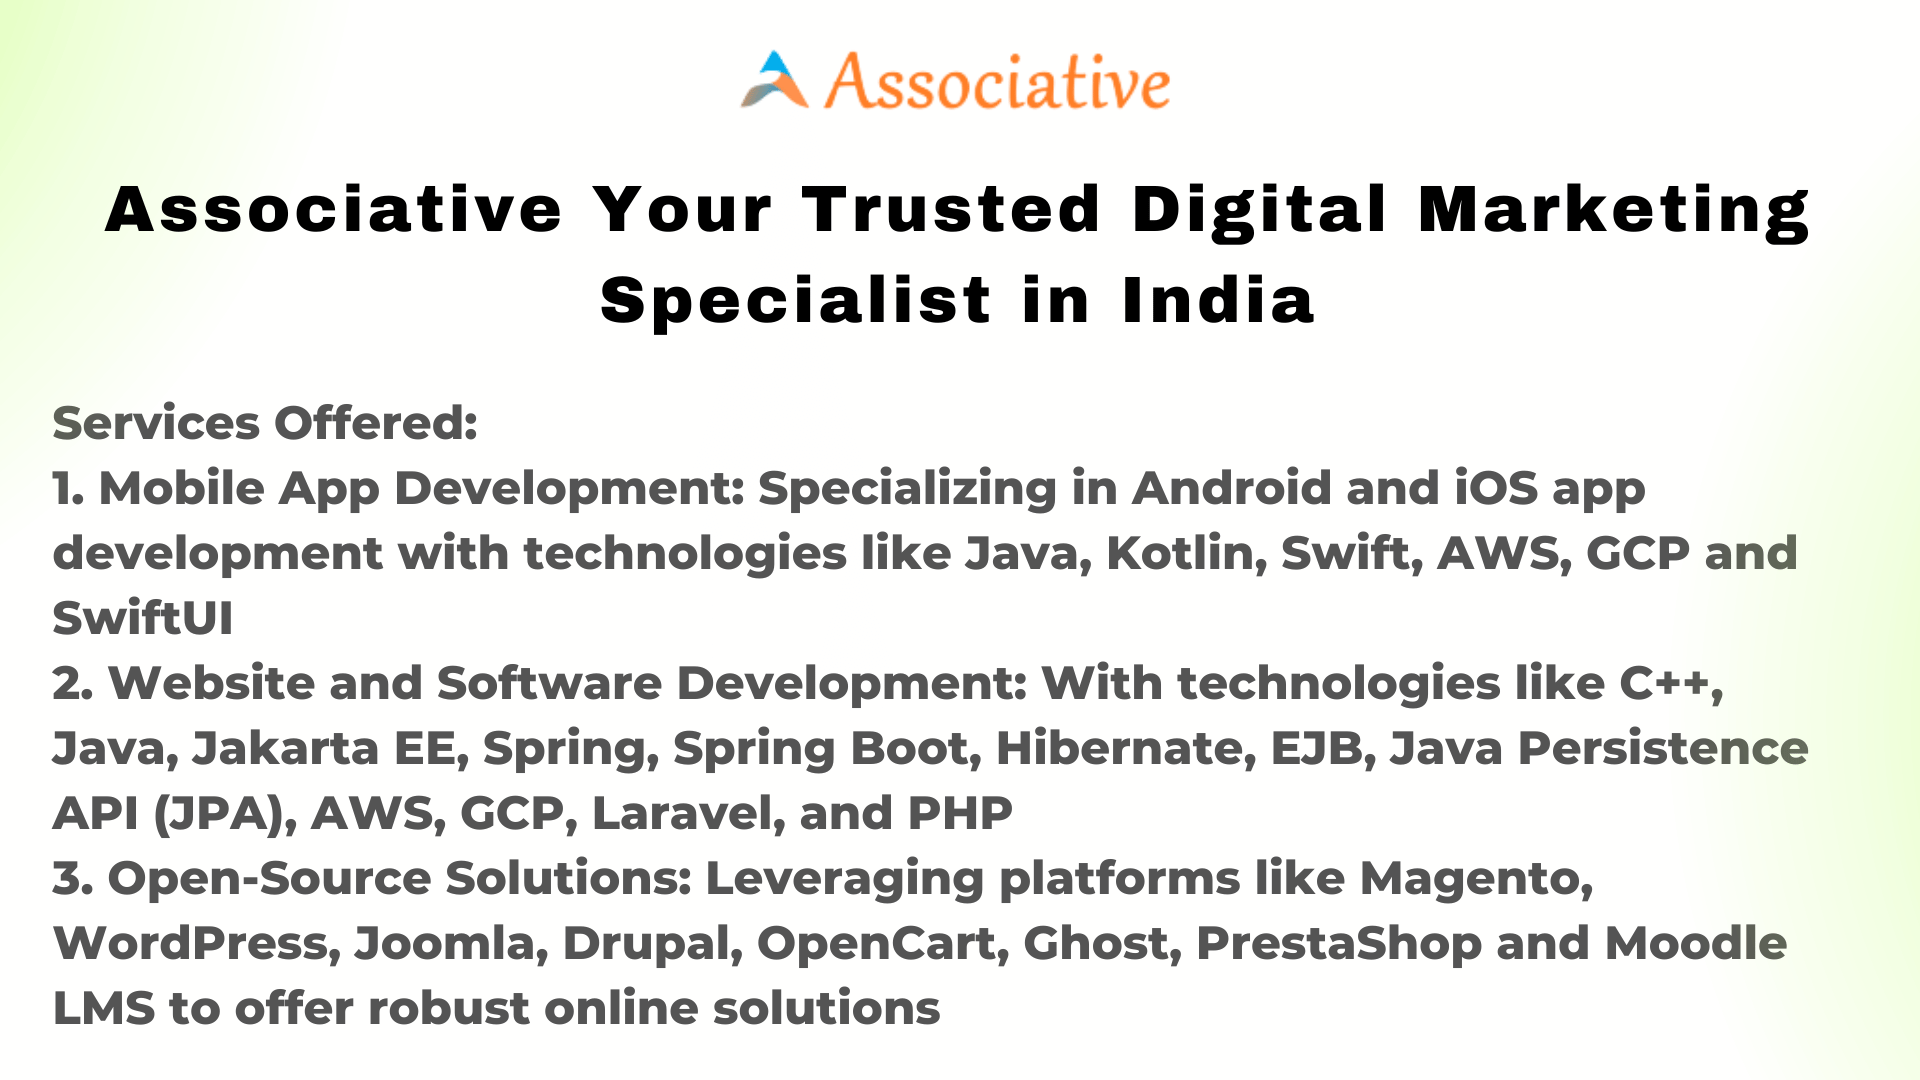 Associative Your Trusted Digital Marketing Specialist in India